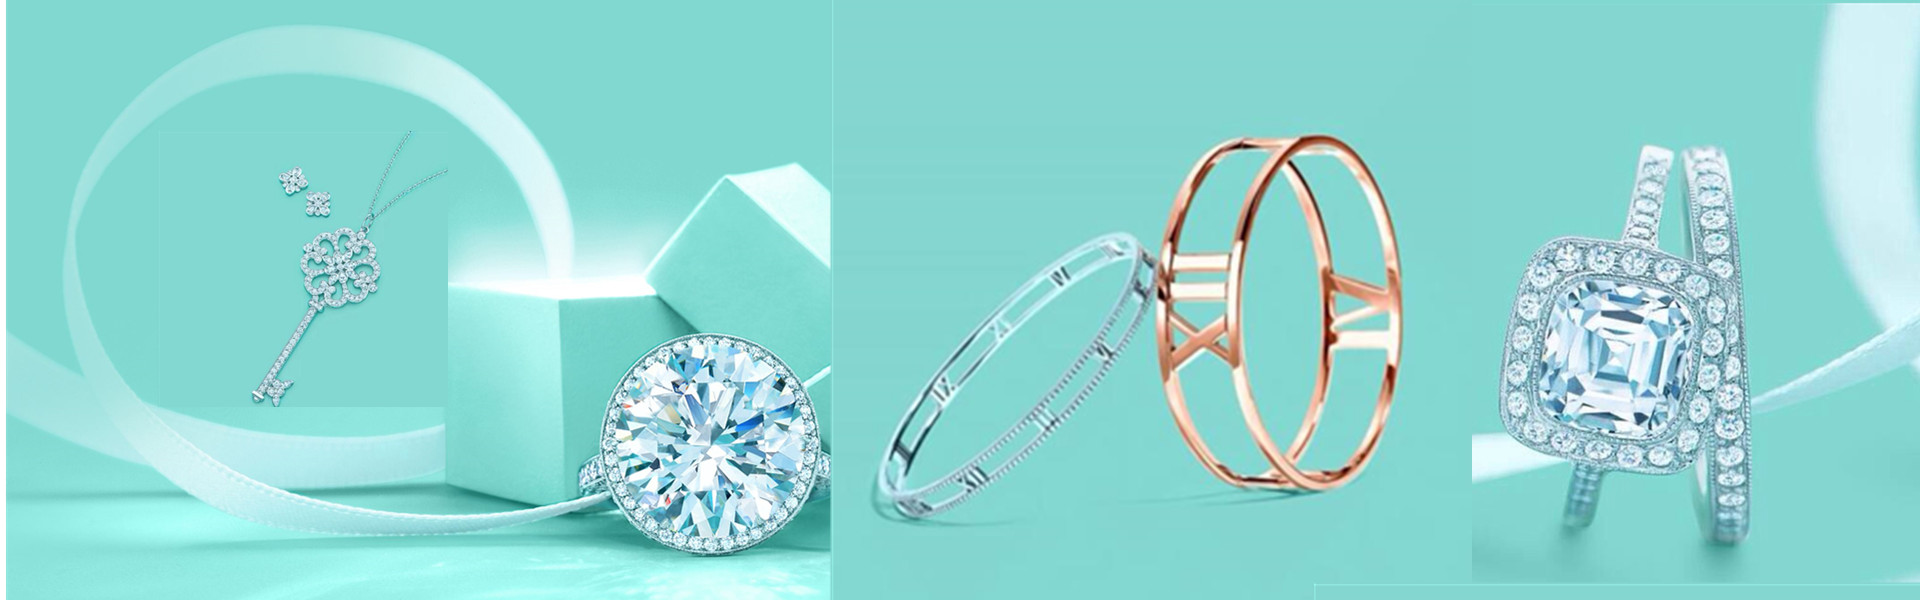 Looking to sell Tiffany & Co. jewelry without box and papers?